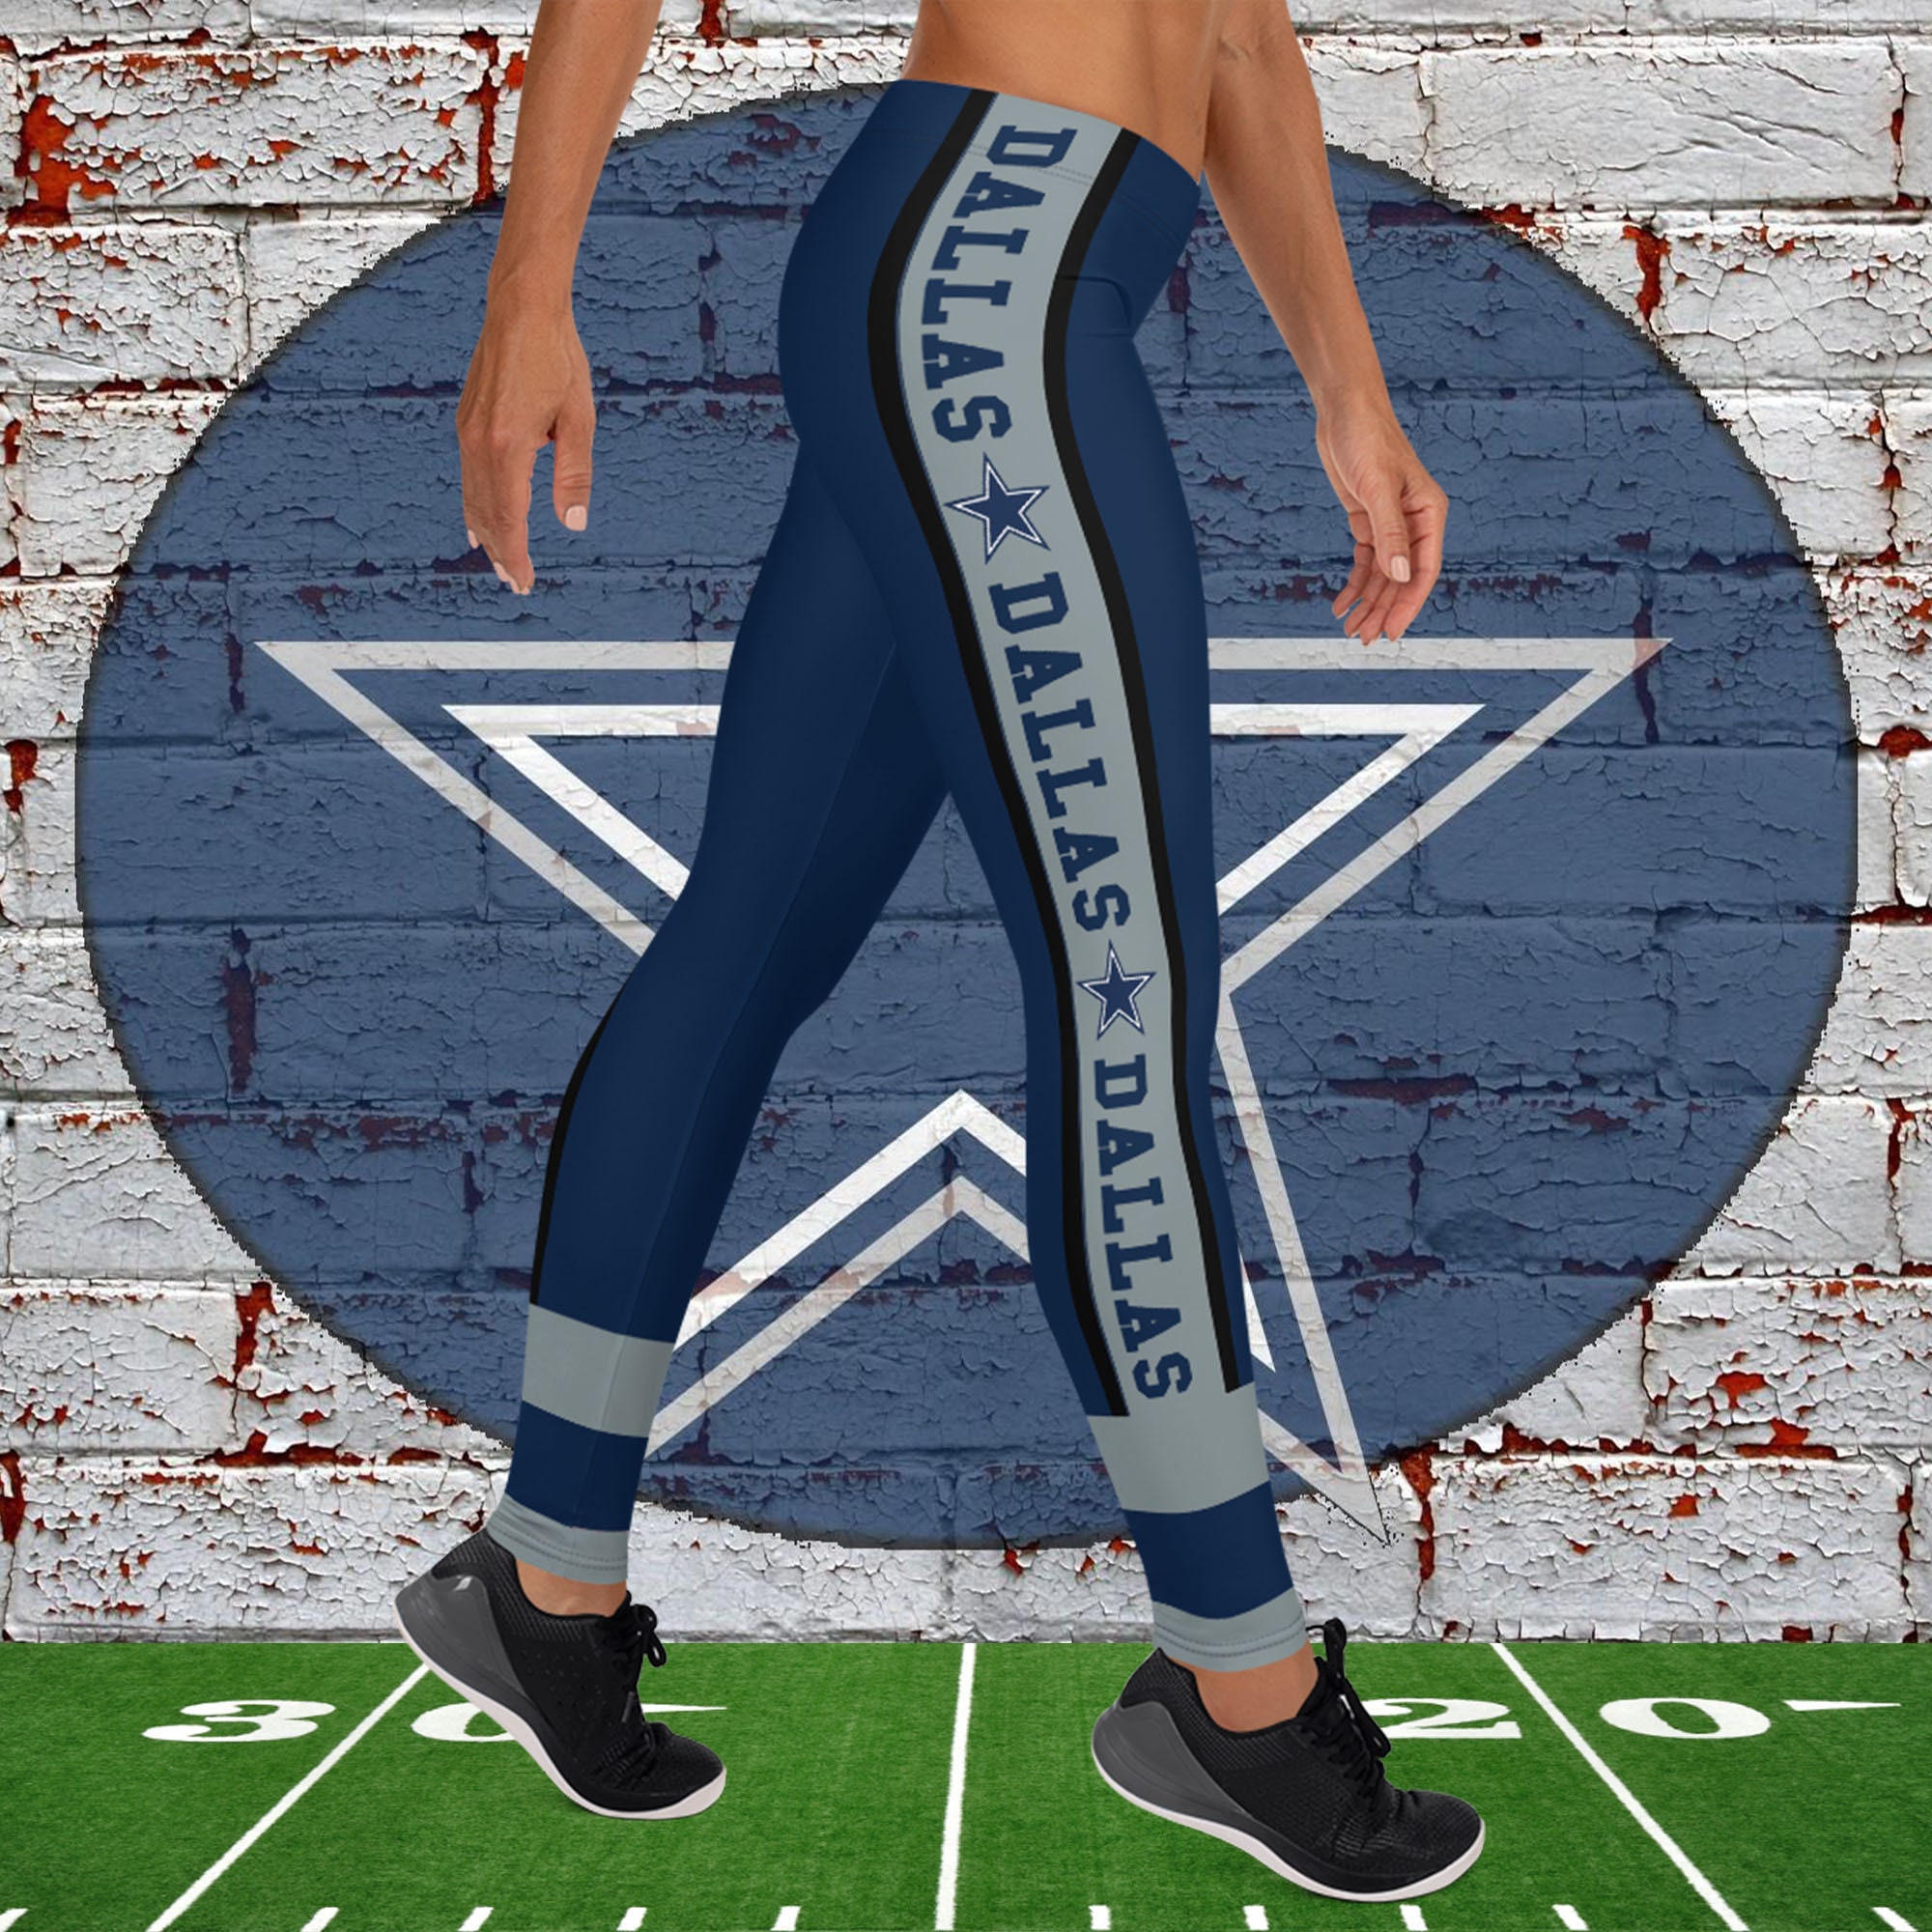 Dallas Fan/team Colors Metallic Silver With Blue-white Stars and